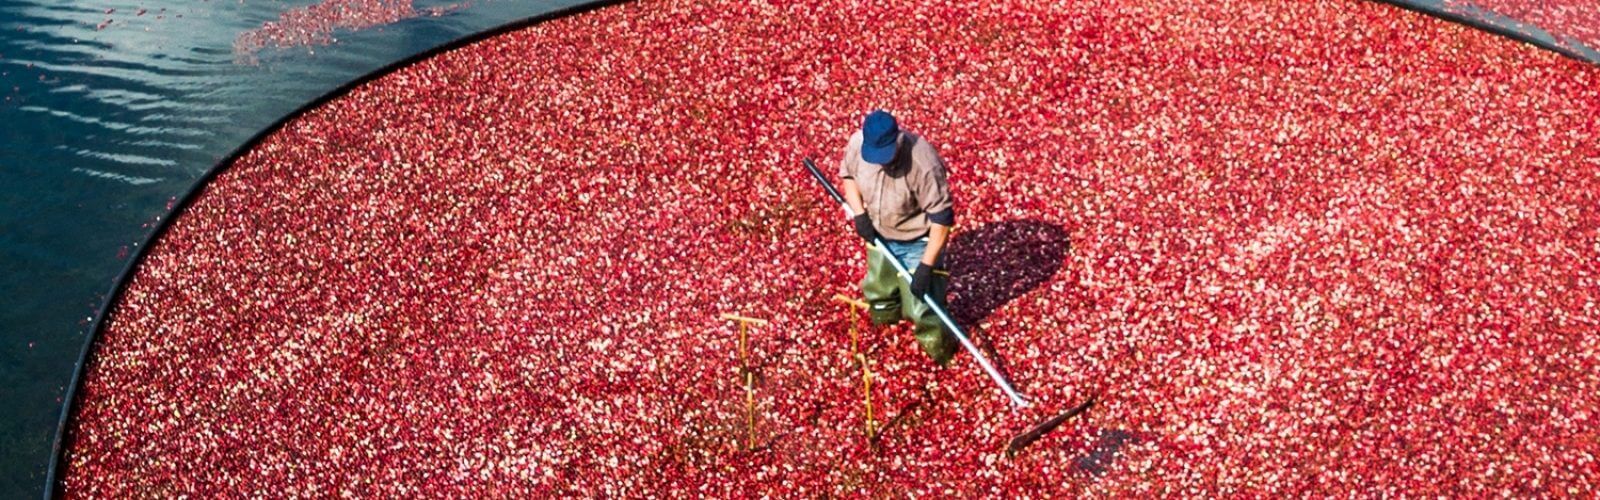 Manufacturing sites throughout the USA - Cranberry Bog